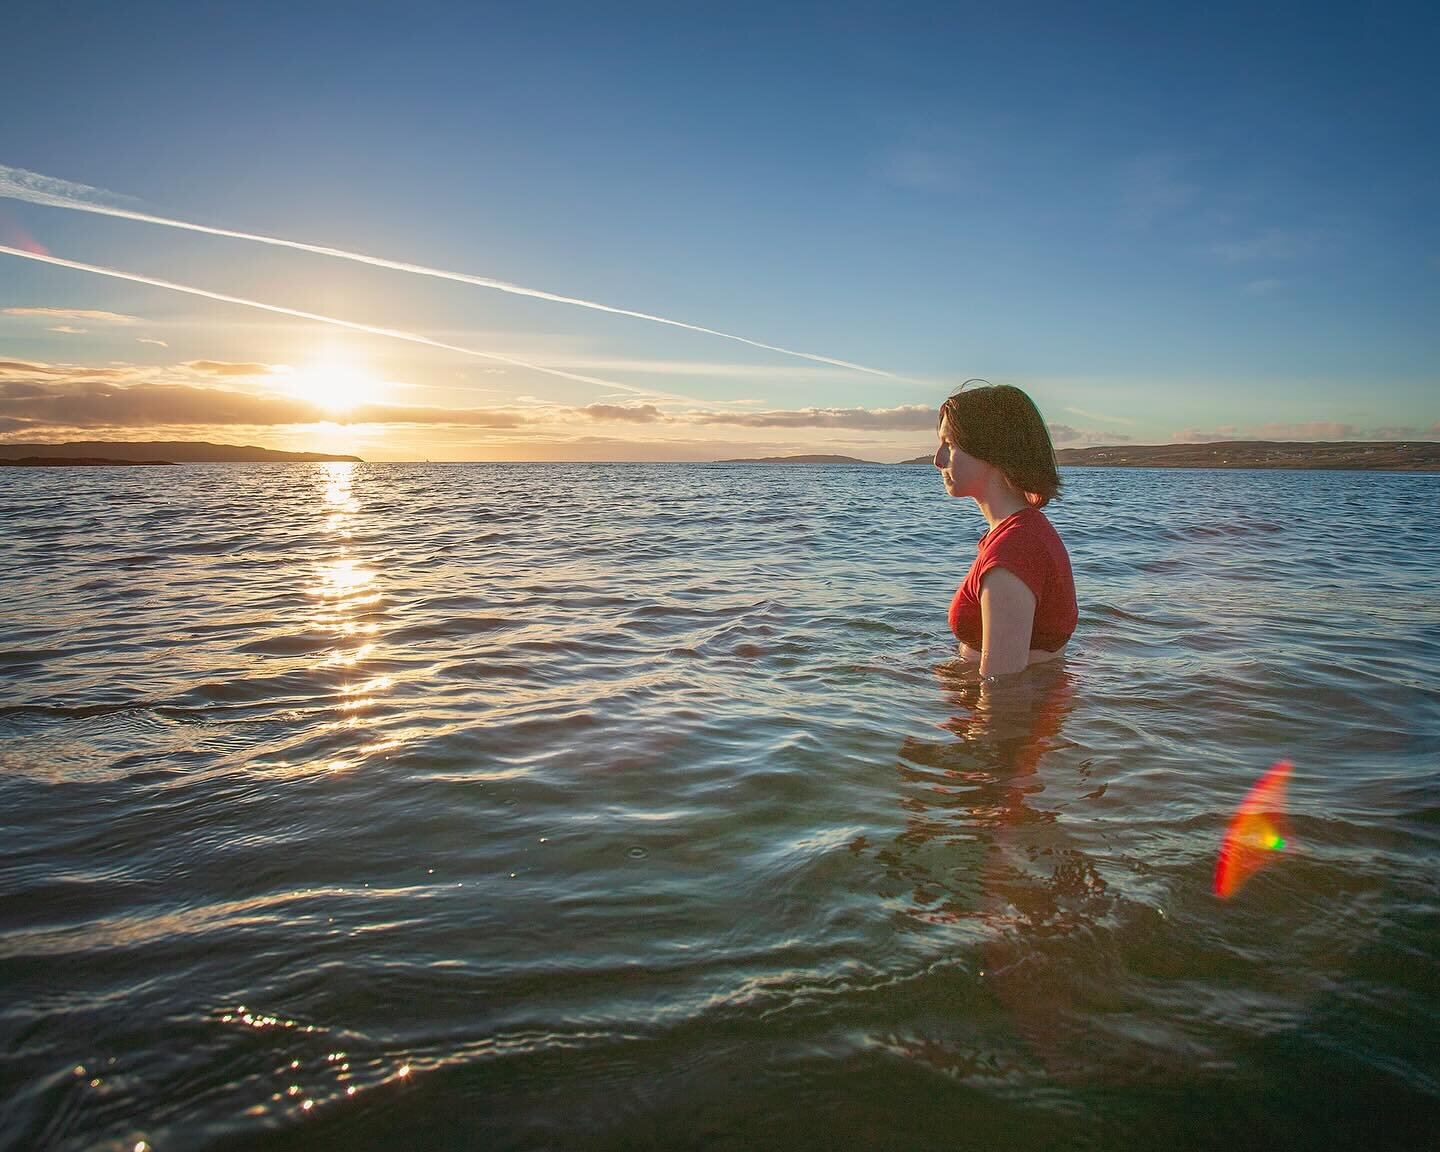 I&rsquo;ve been down in the archives looking for watery images for a prospective client and I found this image which was shot for @kate_rew &lsquo;s book Wild Swim (recently reissued). We arrived at Gairloch fresh off the plane at the start of the Sc